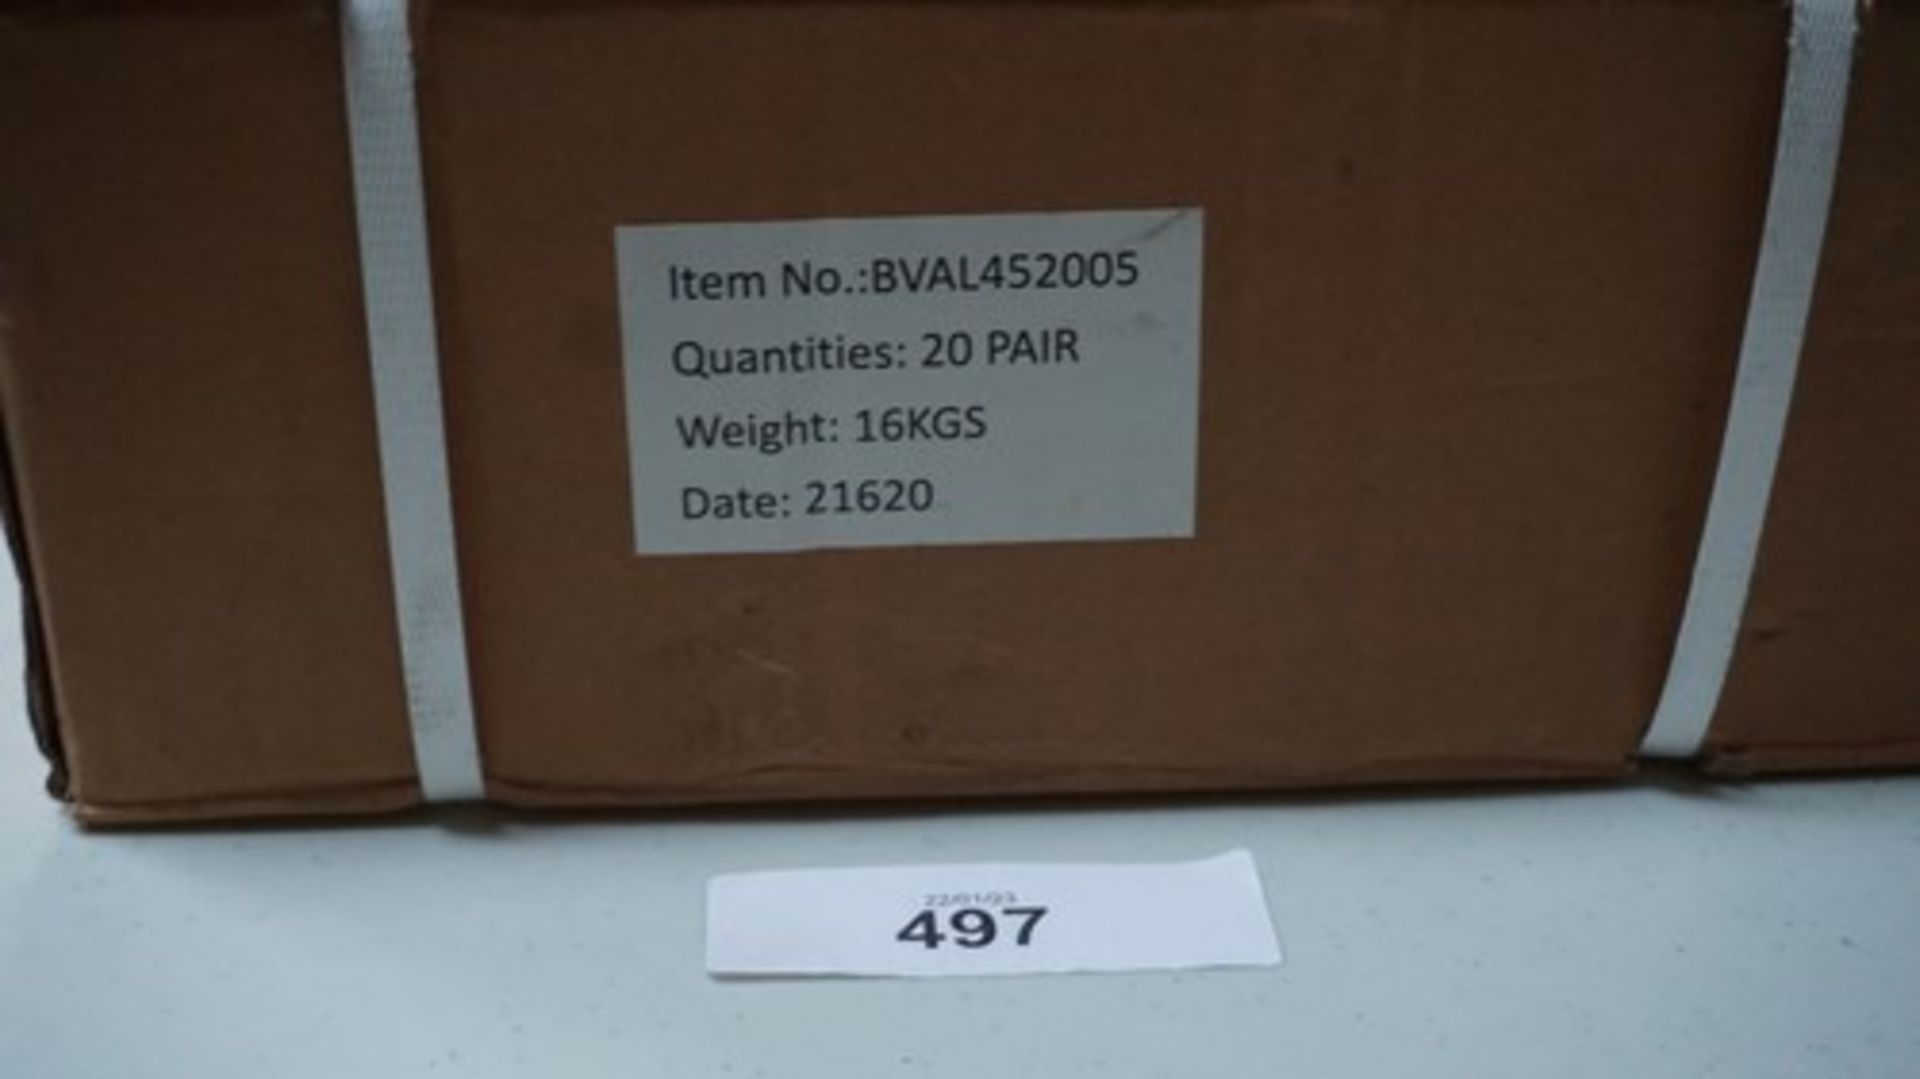 20 x pairs of hot and cold Ball Valves with pressure gauges model no: BVAL452005. -new in box- (